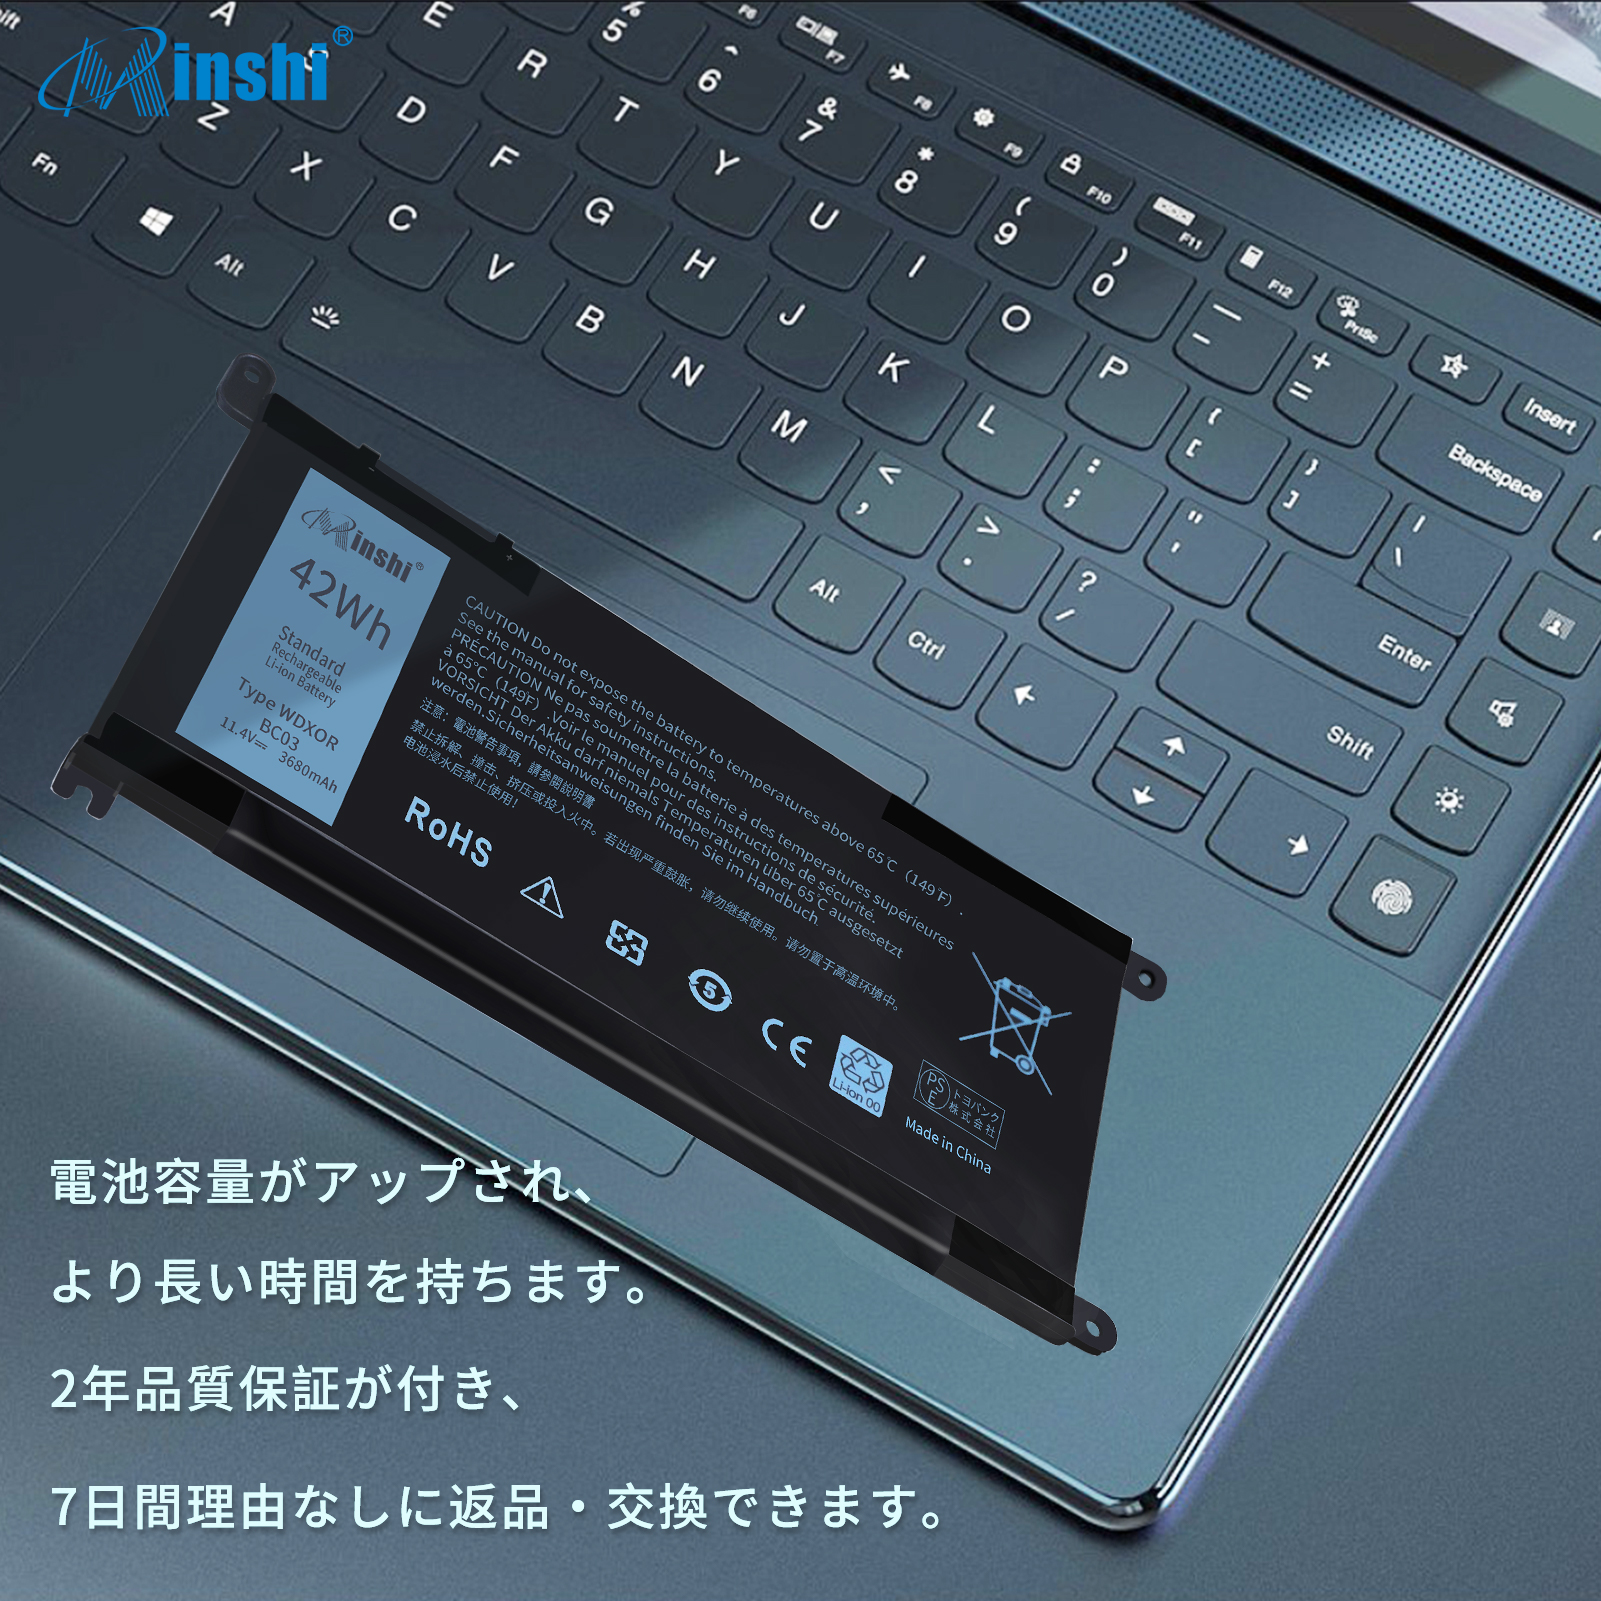 DELL 5570（ノートパソコンバッテリー）の商品一覧｜ノートパソコン